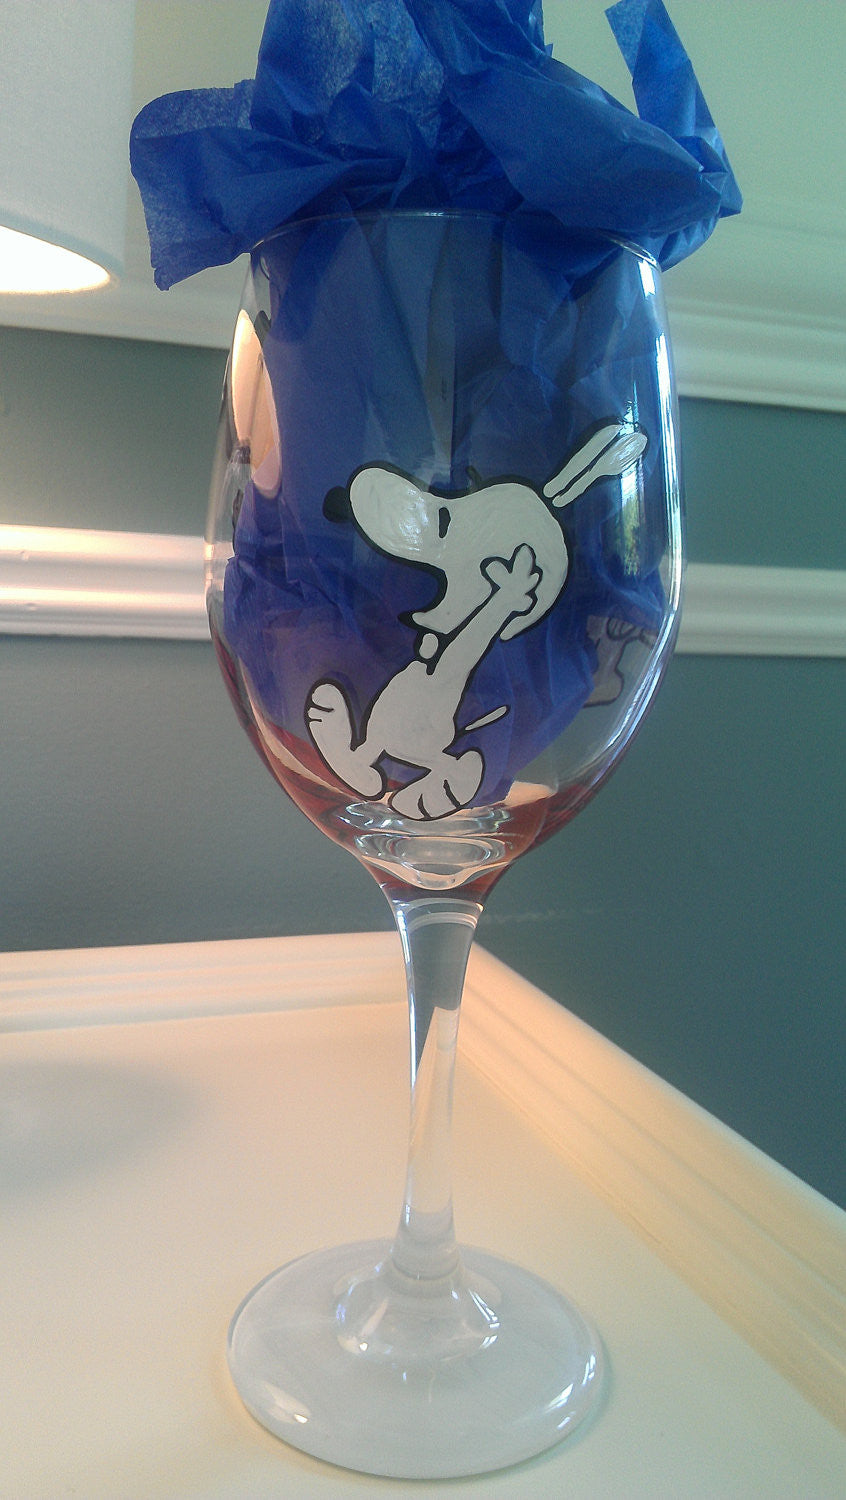 Snoopy Inspired Wine Glass, Snoopy Red Baron, Peanuts Gang,pilot 